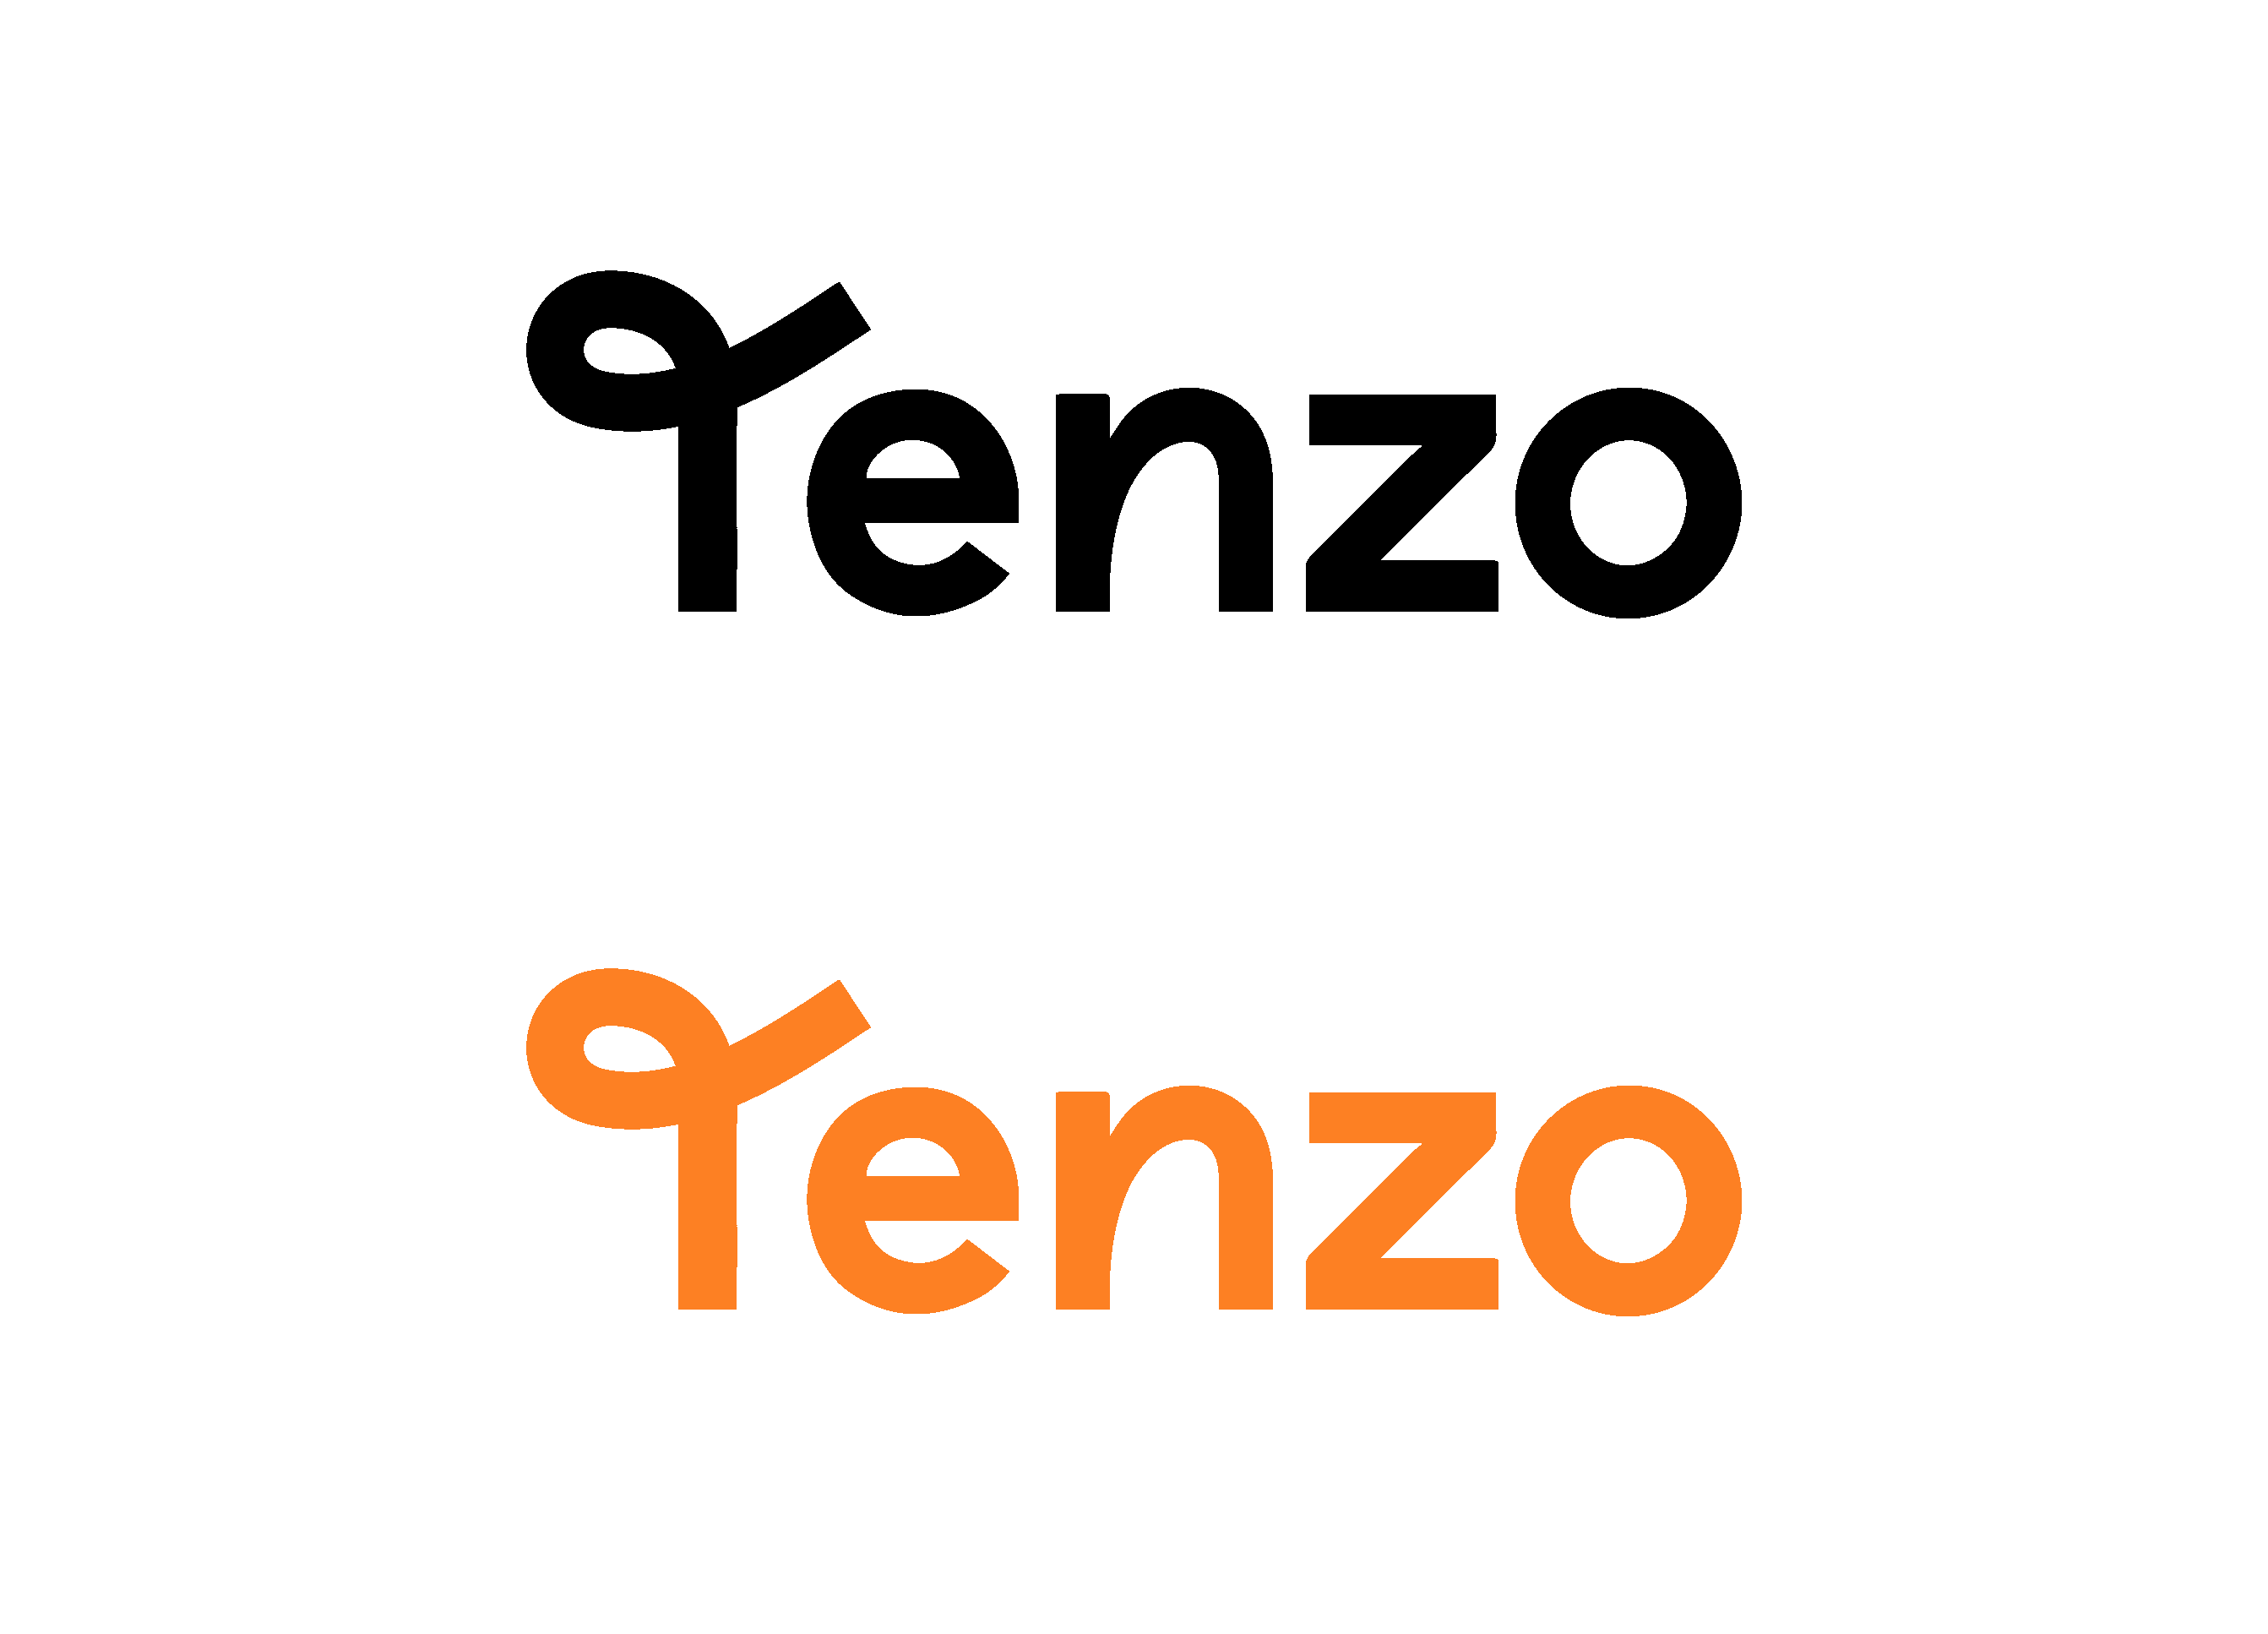 Tenzo - brand identity, guideline and assets.